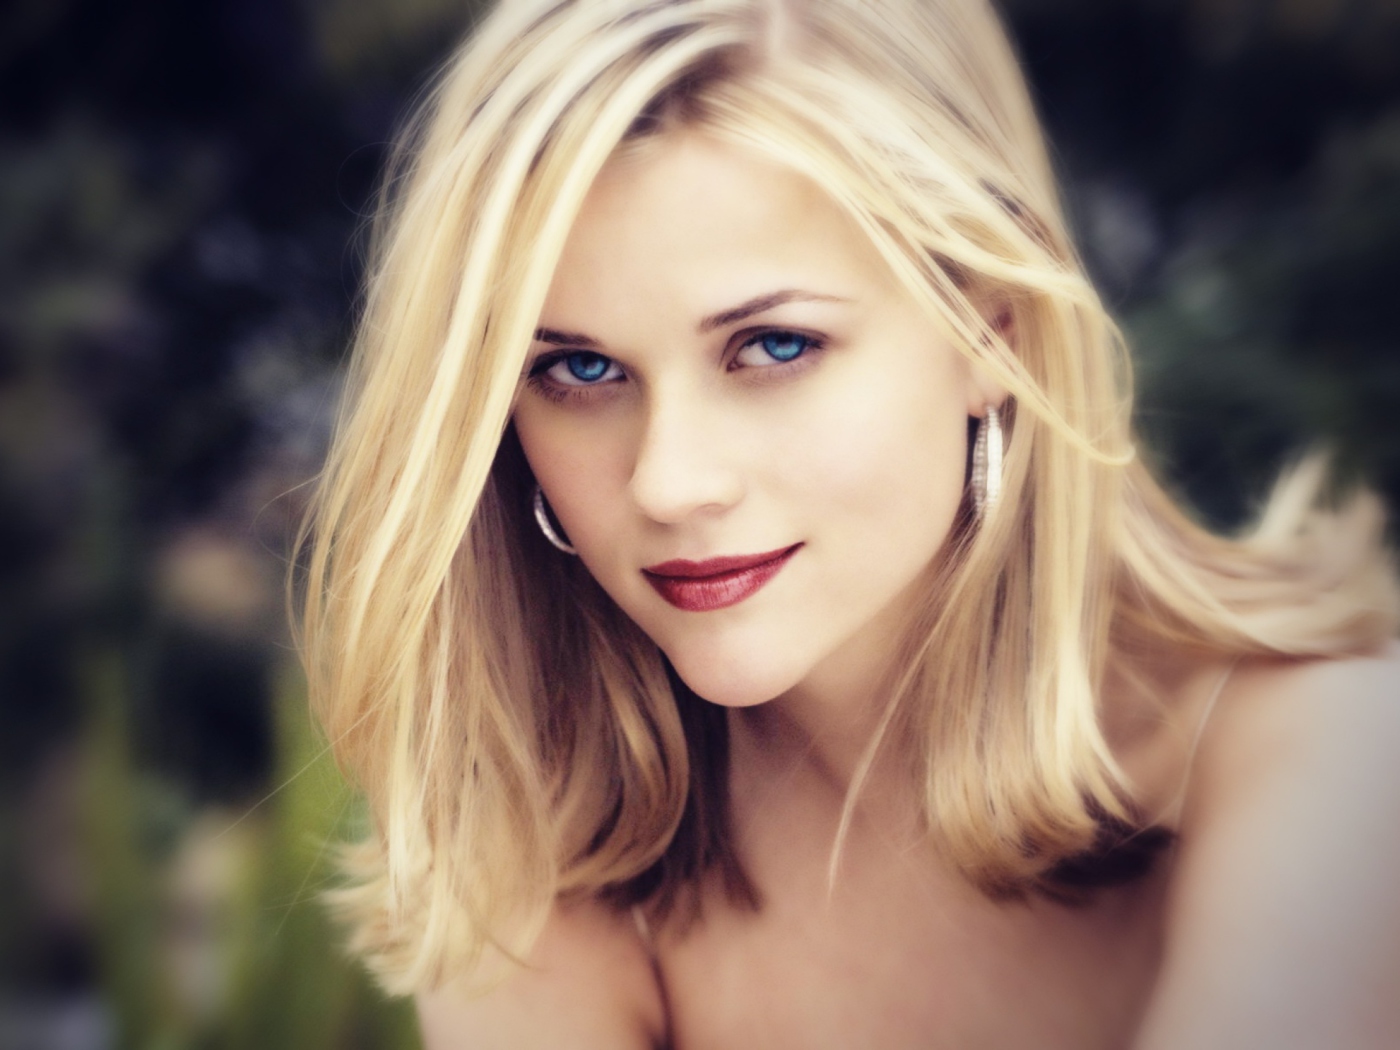 Das Reese Witherspoon Wallpaper 1400x1050